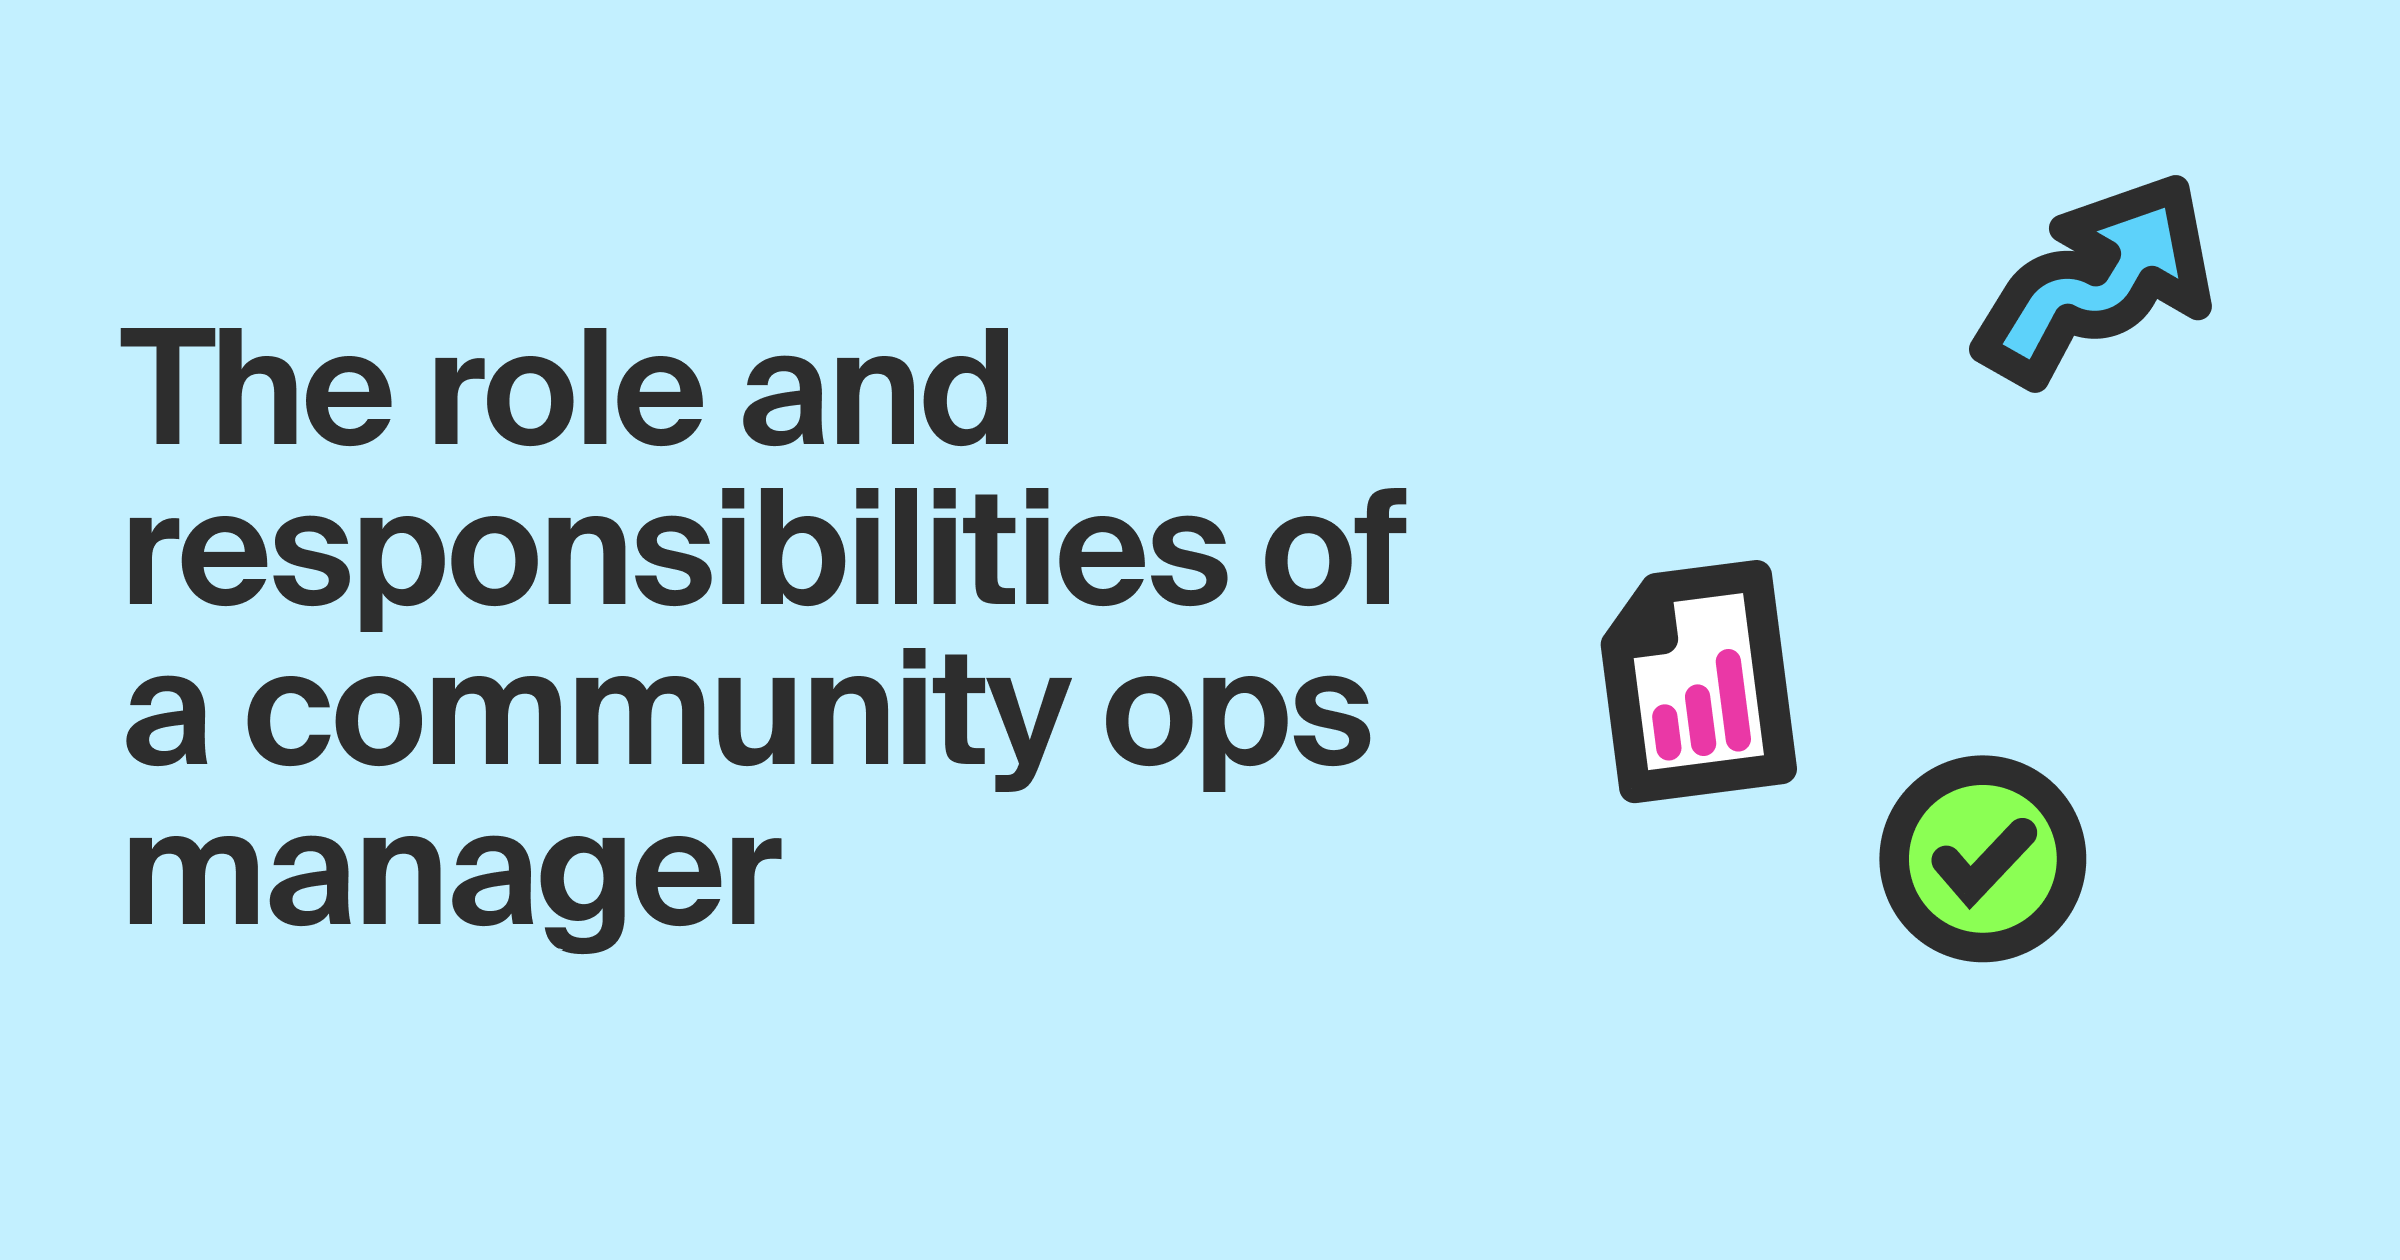 The role and responsibilities of a community ops manager